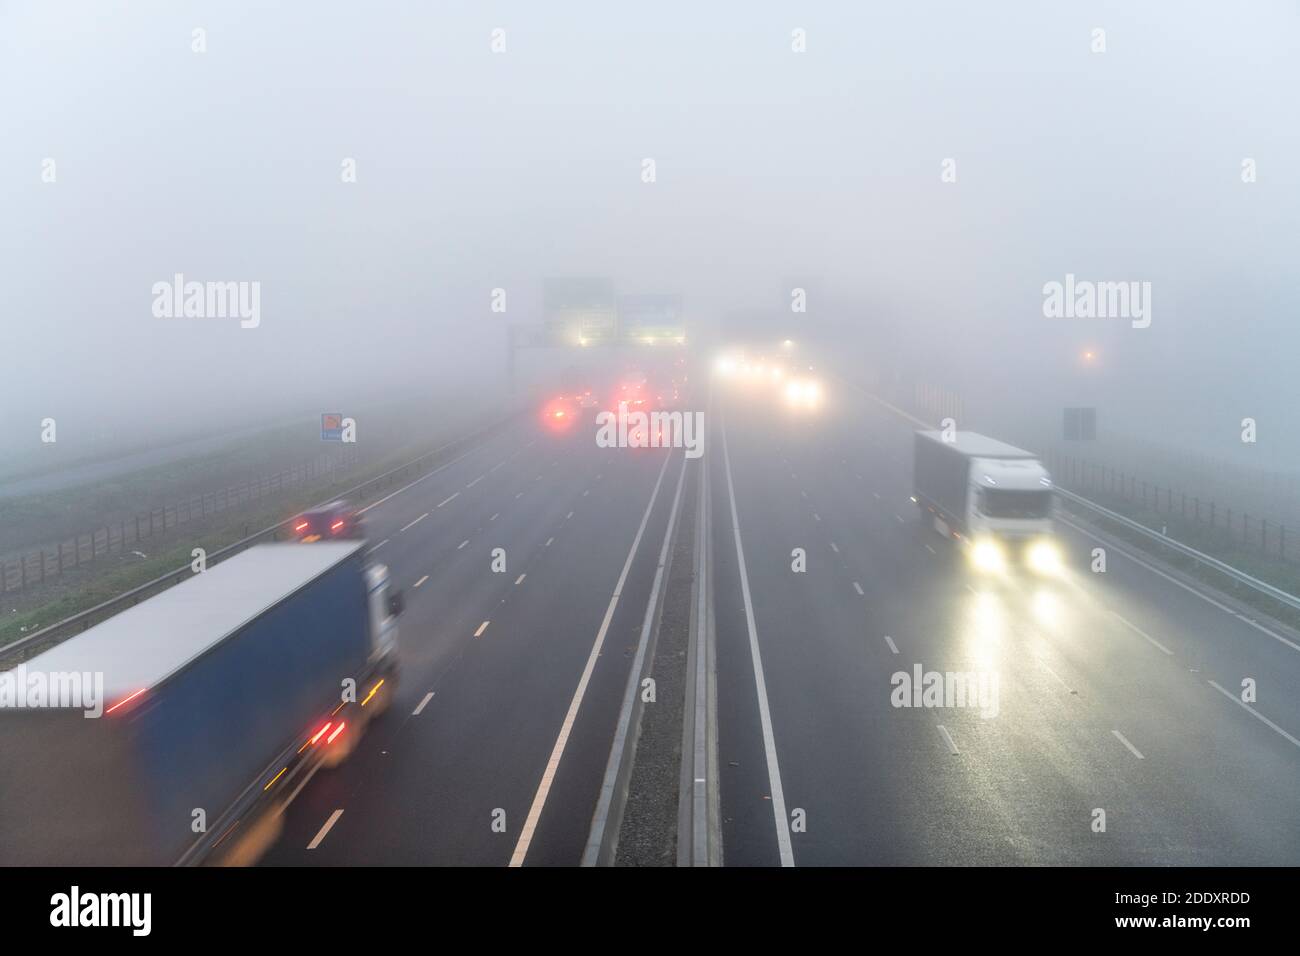 Bar Hill Cambridgeshire, UK. 27th Nov, 2020. Drivers on the A14 dual carriageway road near Cambridge faced freezing fog and poor visibility today. Foggy weather blanketed much of the east of England this morning and is forecast to continue most of the day. Credit: Julian Eales/Alamy Live News Stock Photo